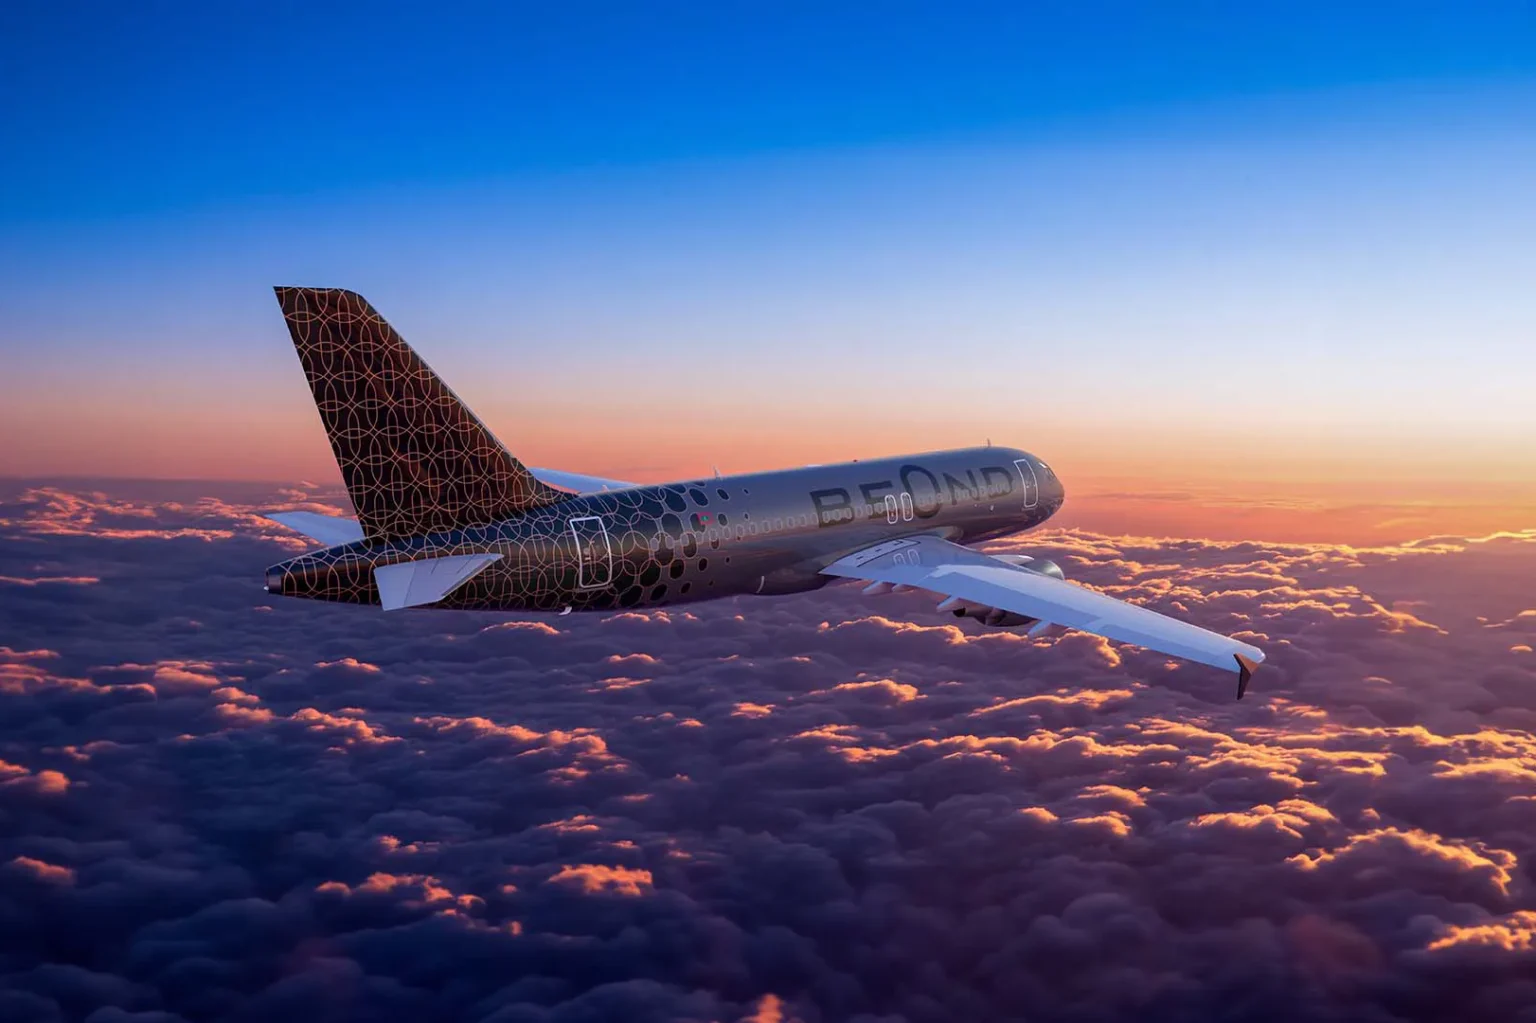 Maldives-based Luxury Airline Beond Launched – New Connection to Bangkok Announced 